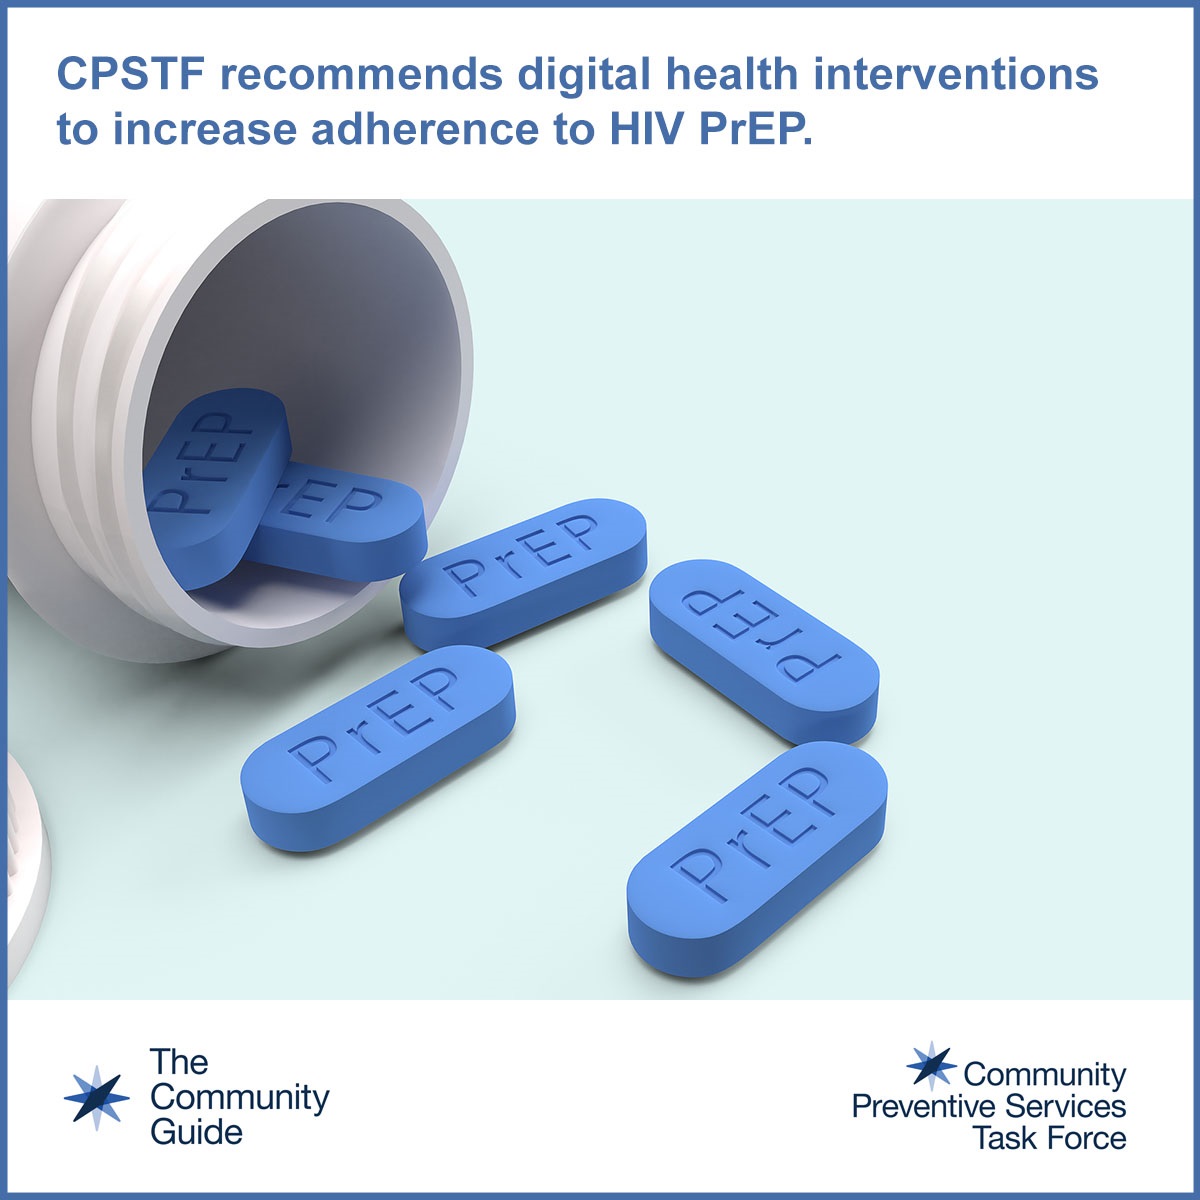 Use this image for social media to promote the CPSTF finding for Digital Health Interventions to Improve Adherence to HIV Pre-Exposure Prophylaxis